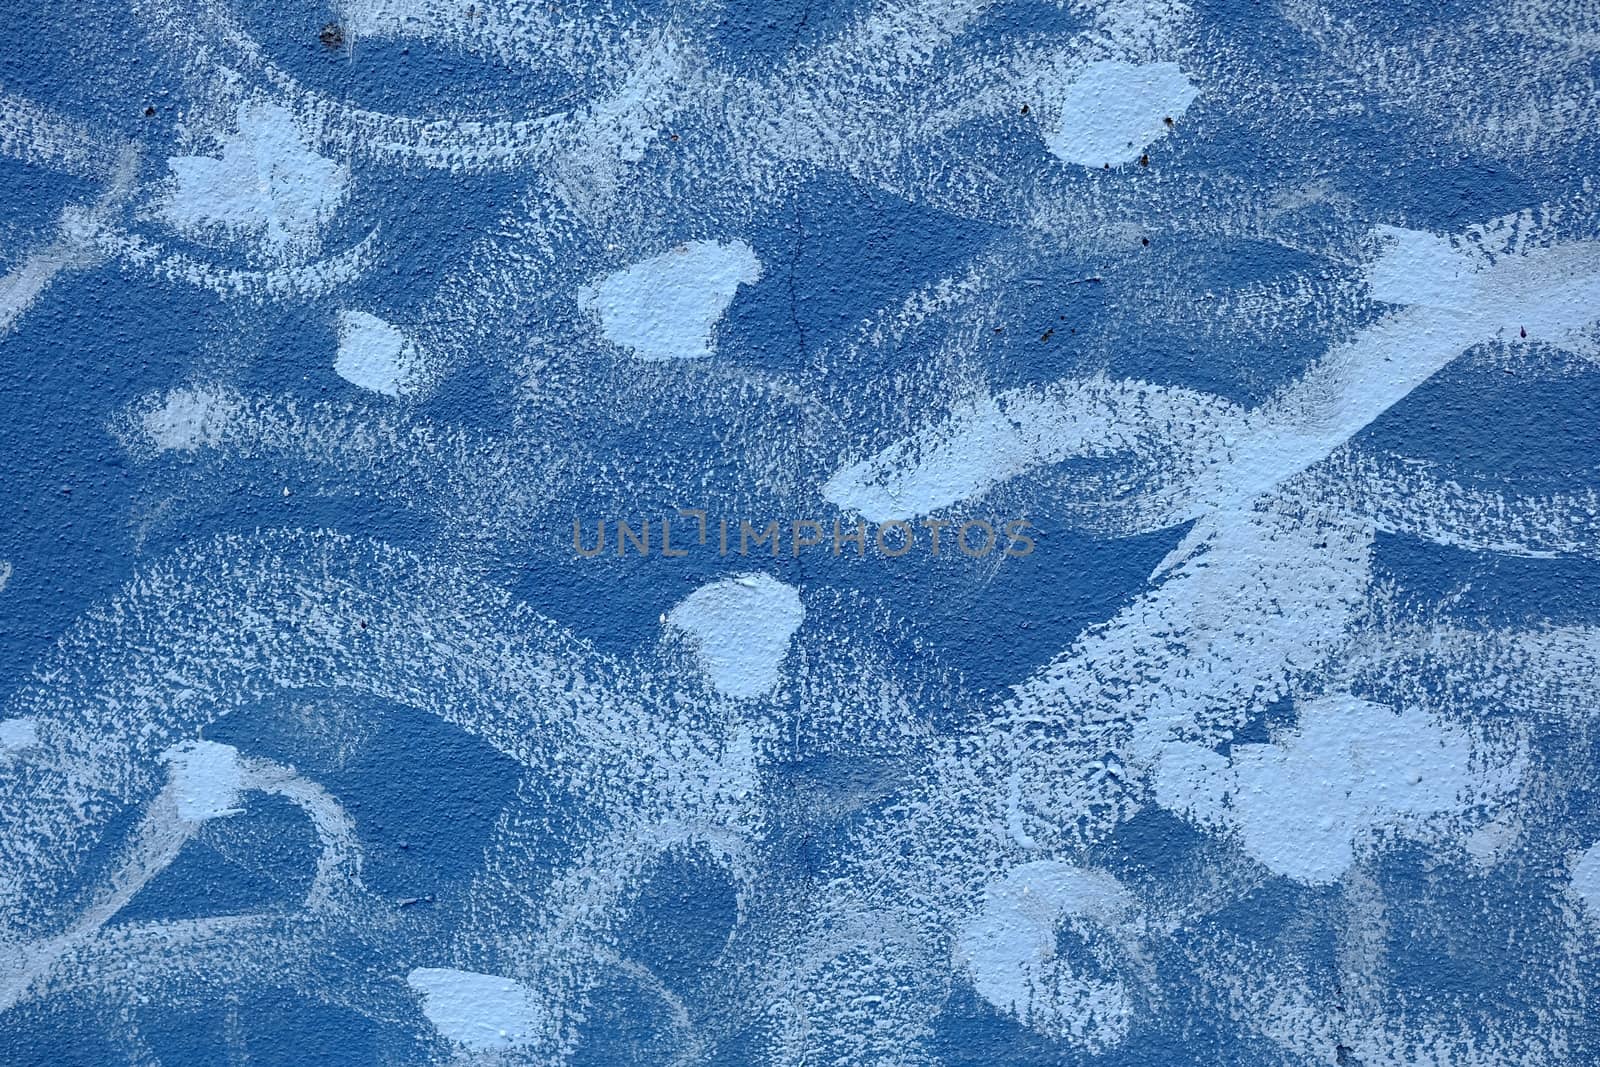 Unfinished White Painting on Grunge Blue Concrete Wall Texture Background. by mesamong